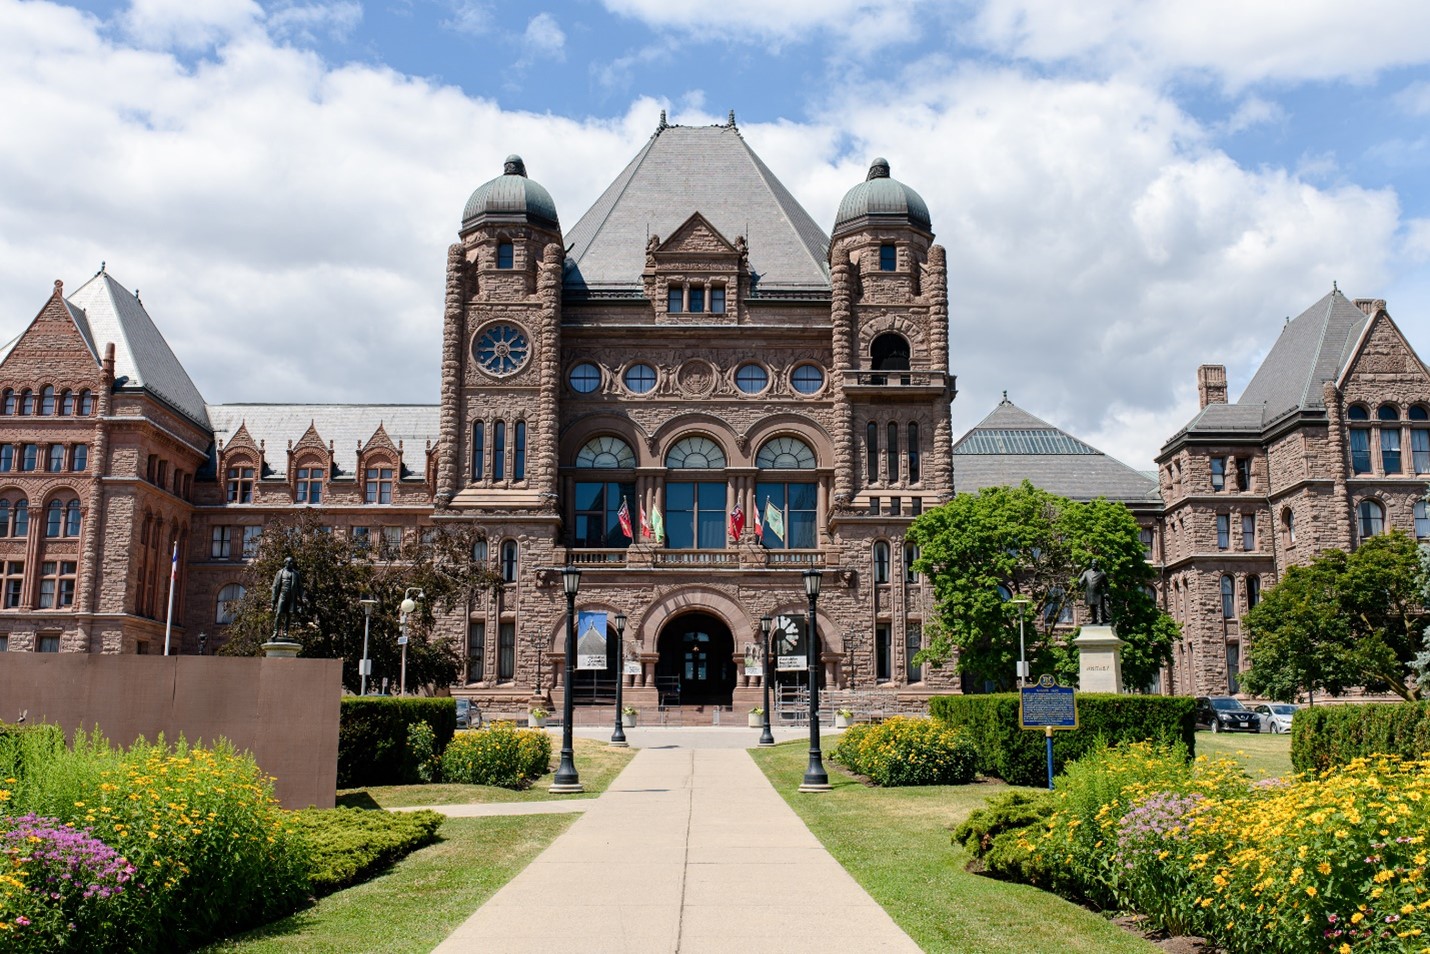 Toronto's Queen's park on a bright, summery day.